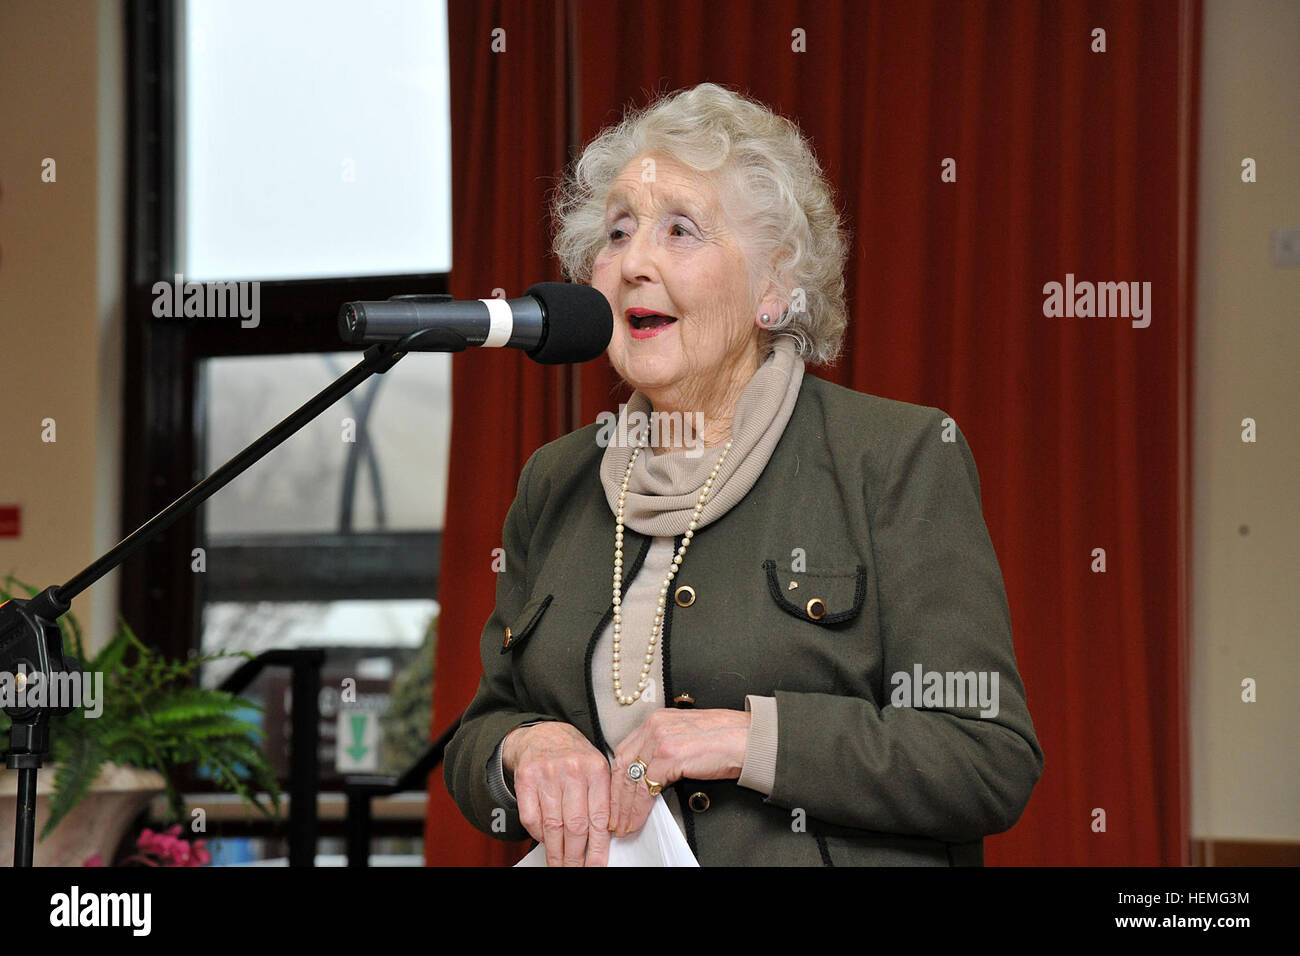 Noreen Riols speaks at a F2F (Female to Female) gathering, Caserma Ederle, Vicenza, Italy, March 28, 2013, as  part of Women's History Month. Rios trained spies for England during WWII for Winston Churchill and has authored several books. (U.S. Army photo by Paolo Bovo JM436 7 JMTC Vicenza - Italy/Released) Noreen Riols, World War II British spy 130328-A-JM436-024 Stock Photo